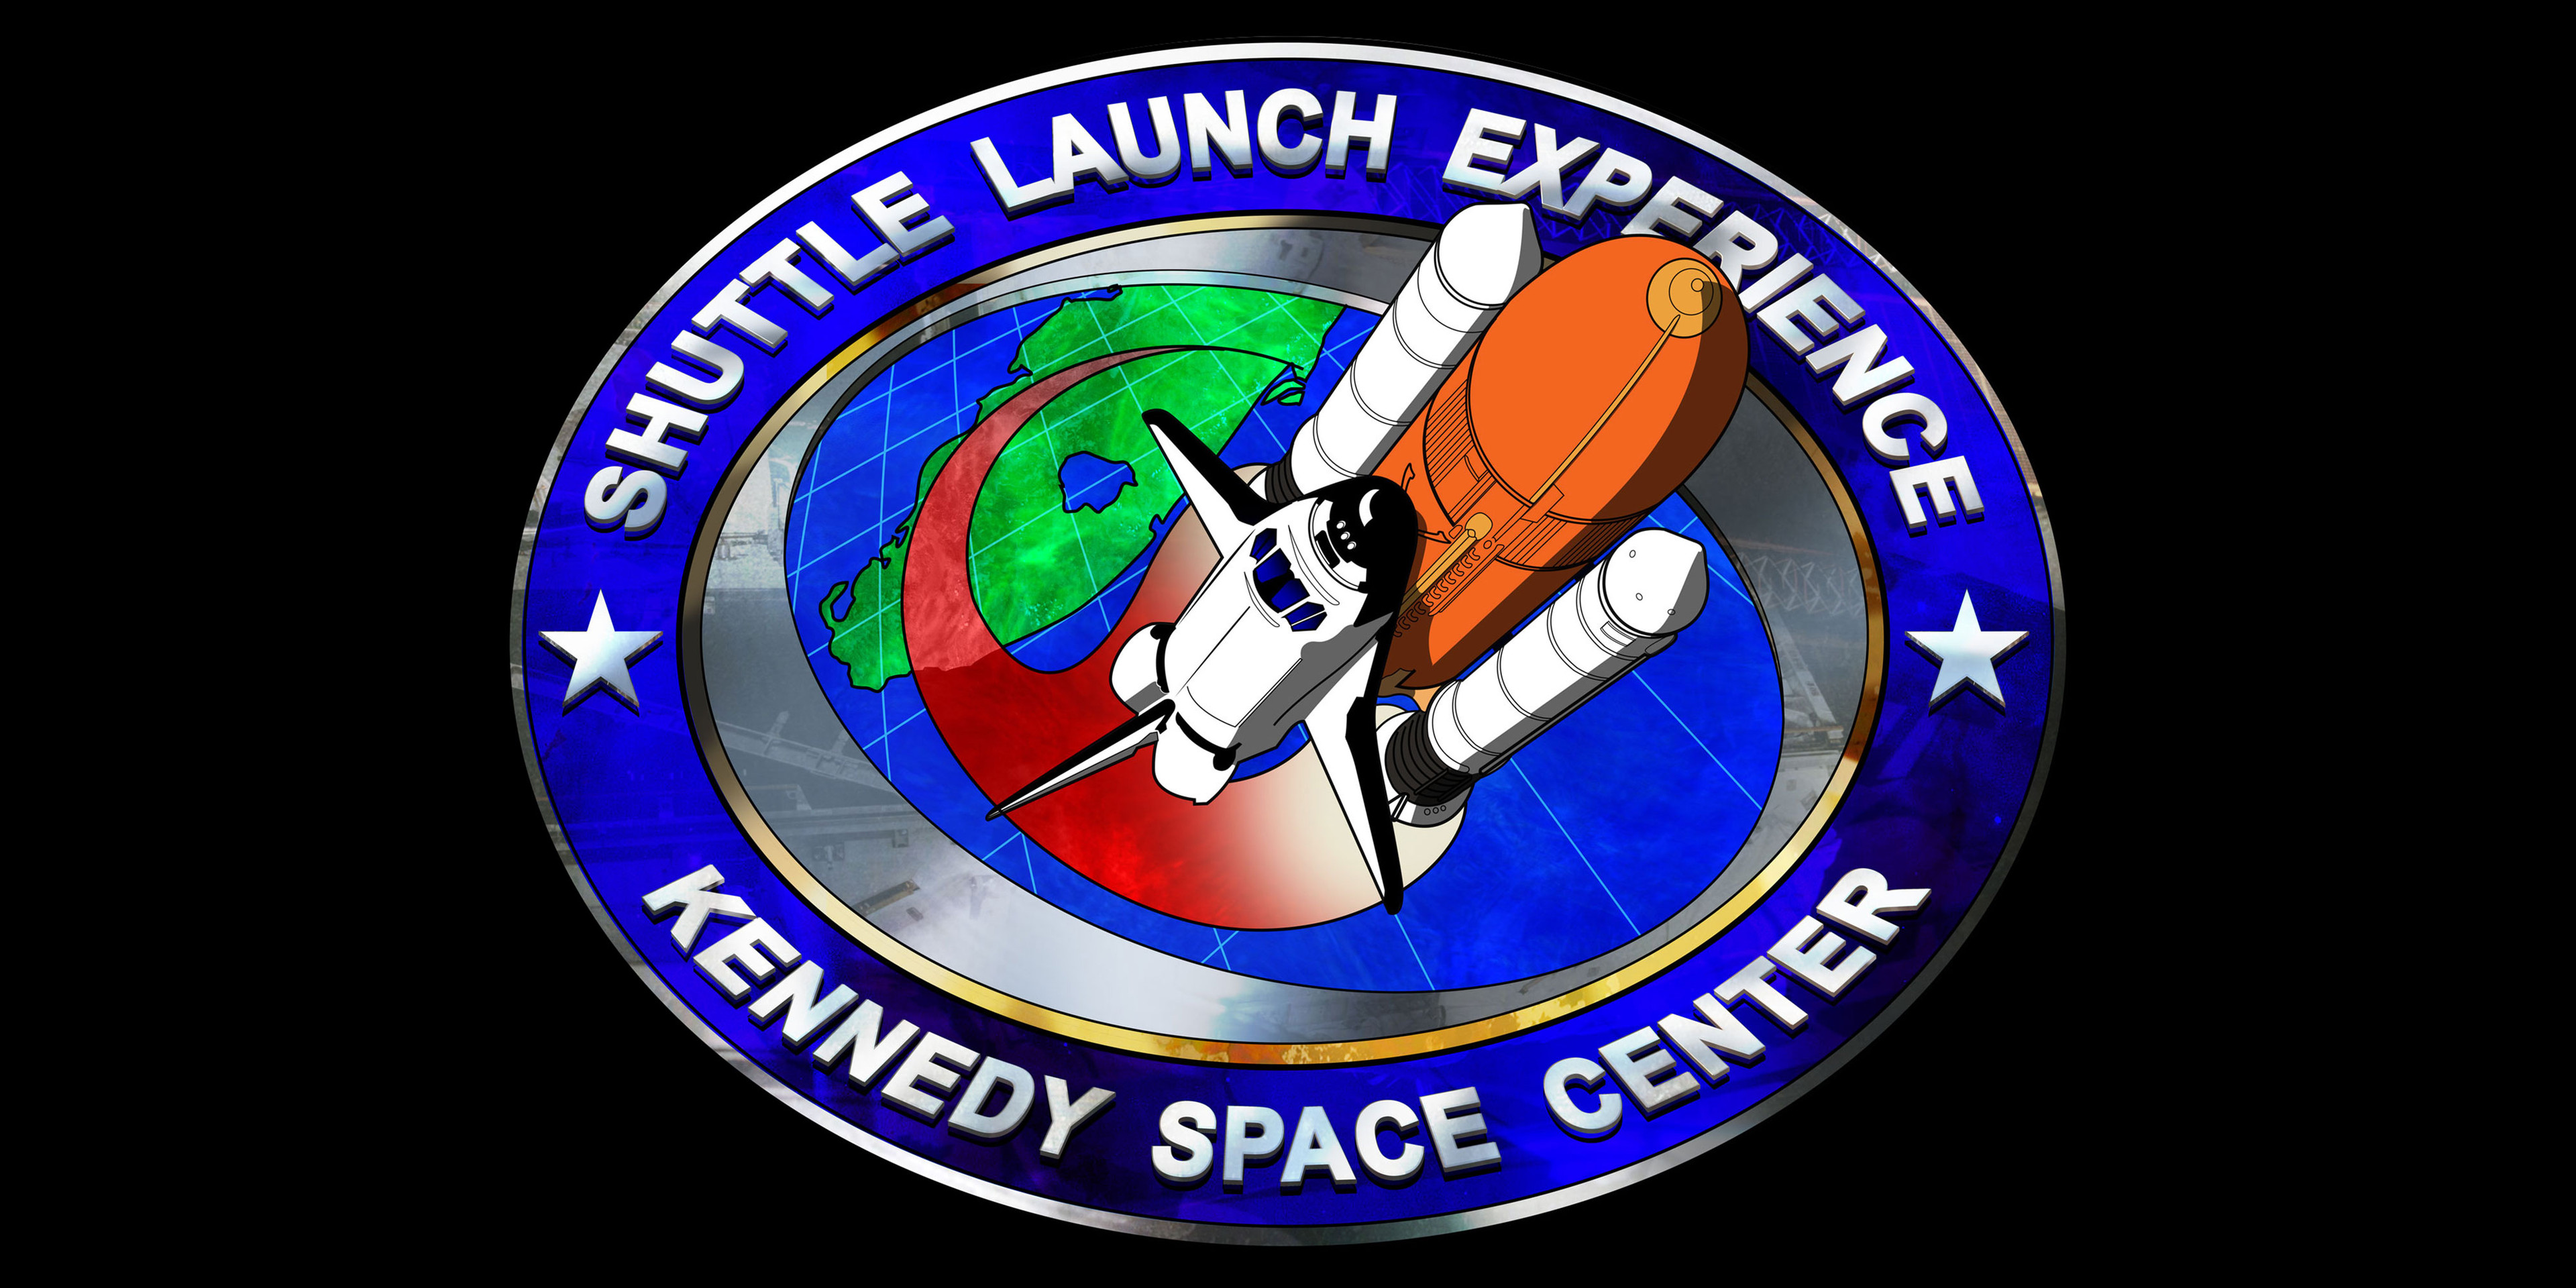 space shuttle launch experience